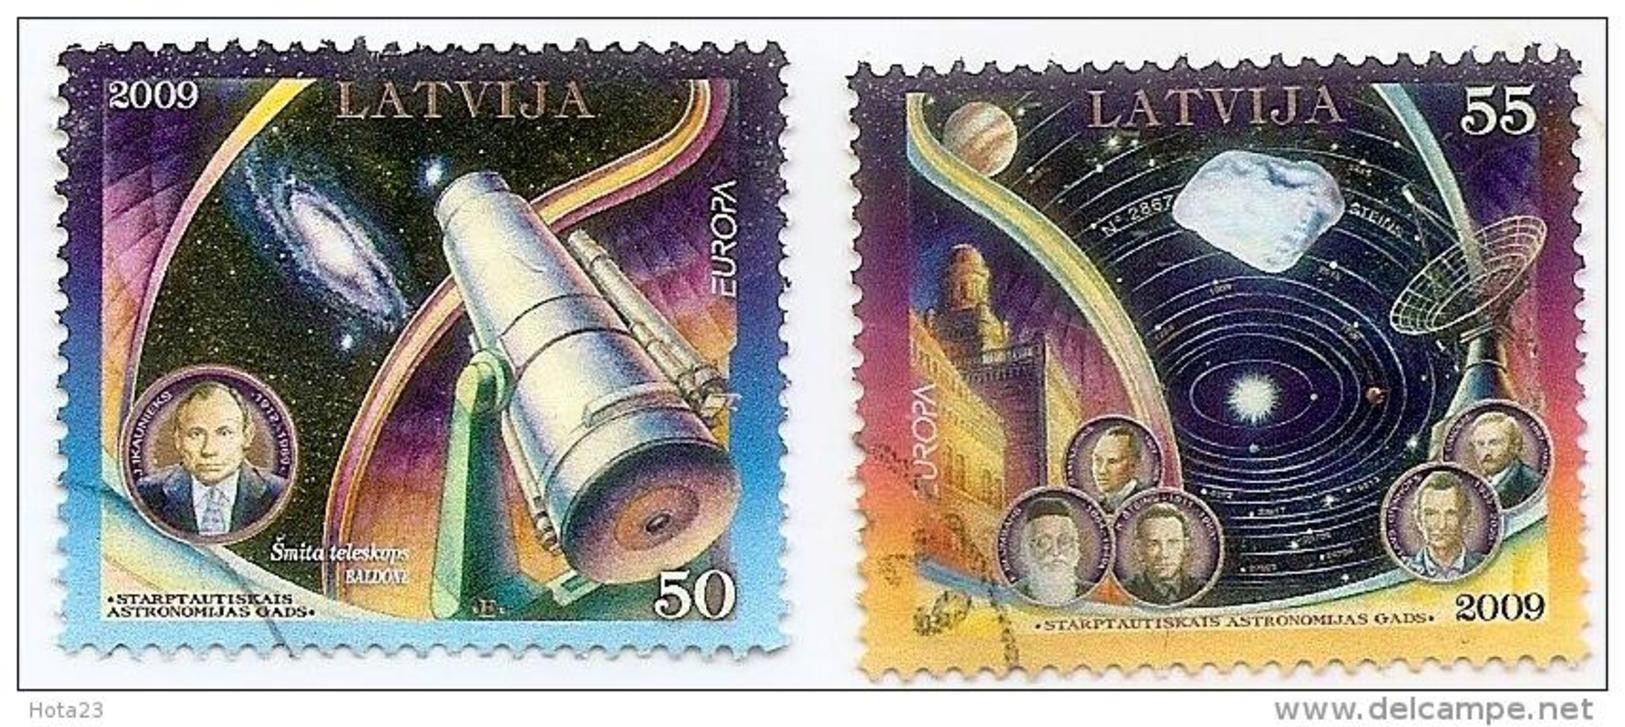 (!) Latvia 2009 Europa  CEPT - Astronomy ,space Station, Planets   - Used Stamps Full Set (o) - Letland